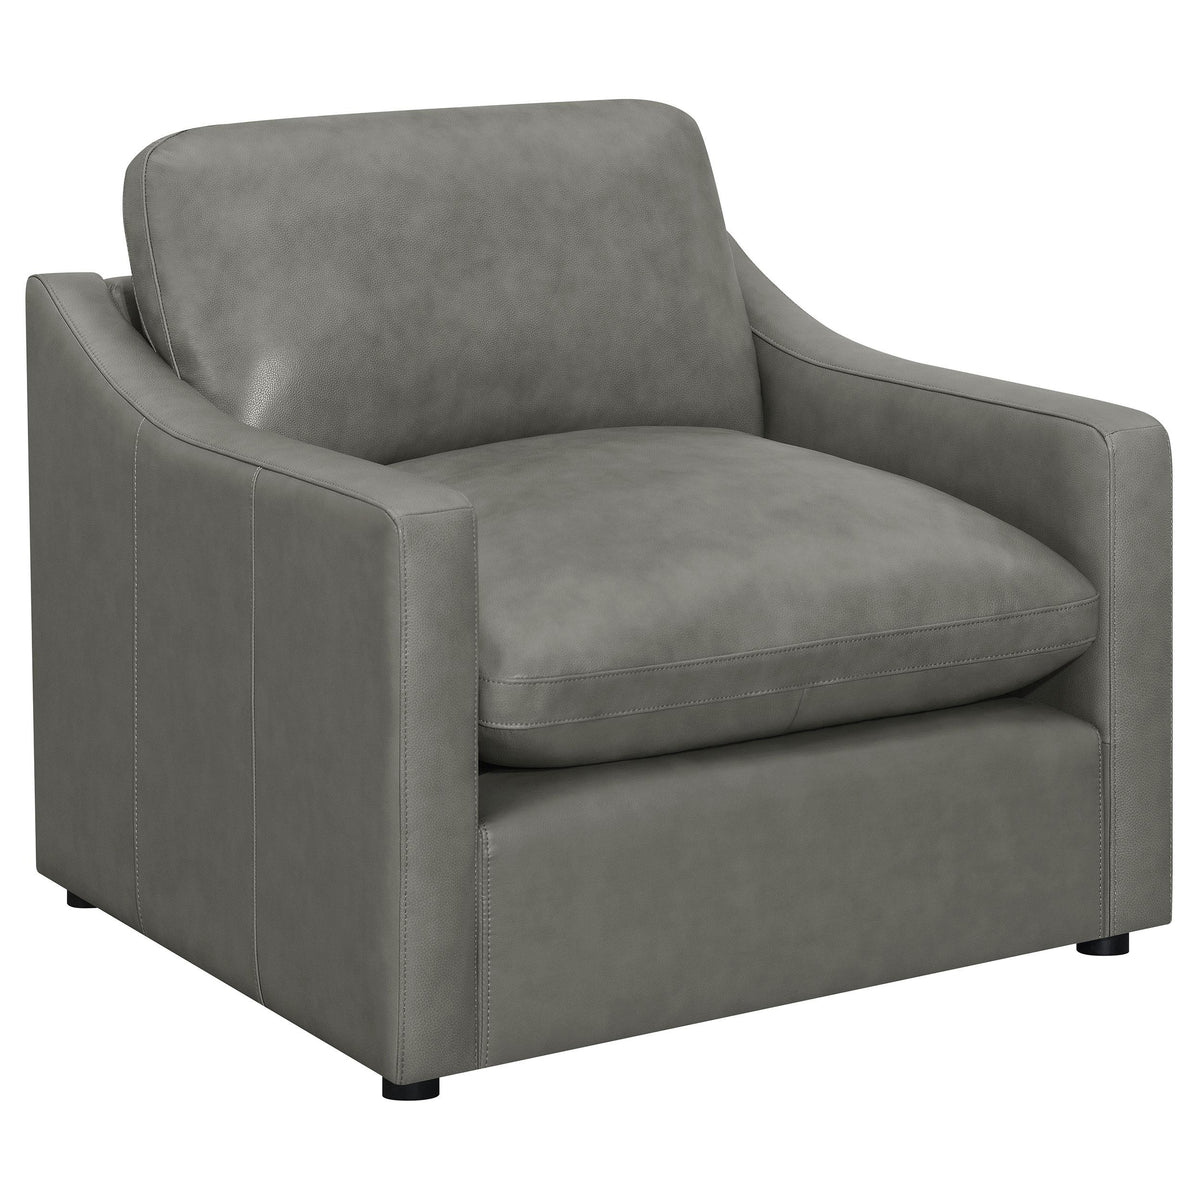 Grayson Sloped Arm Upholstered Chair Grey  Las Vegas Furniture Stores